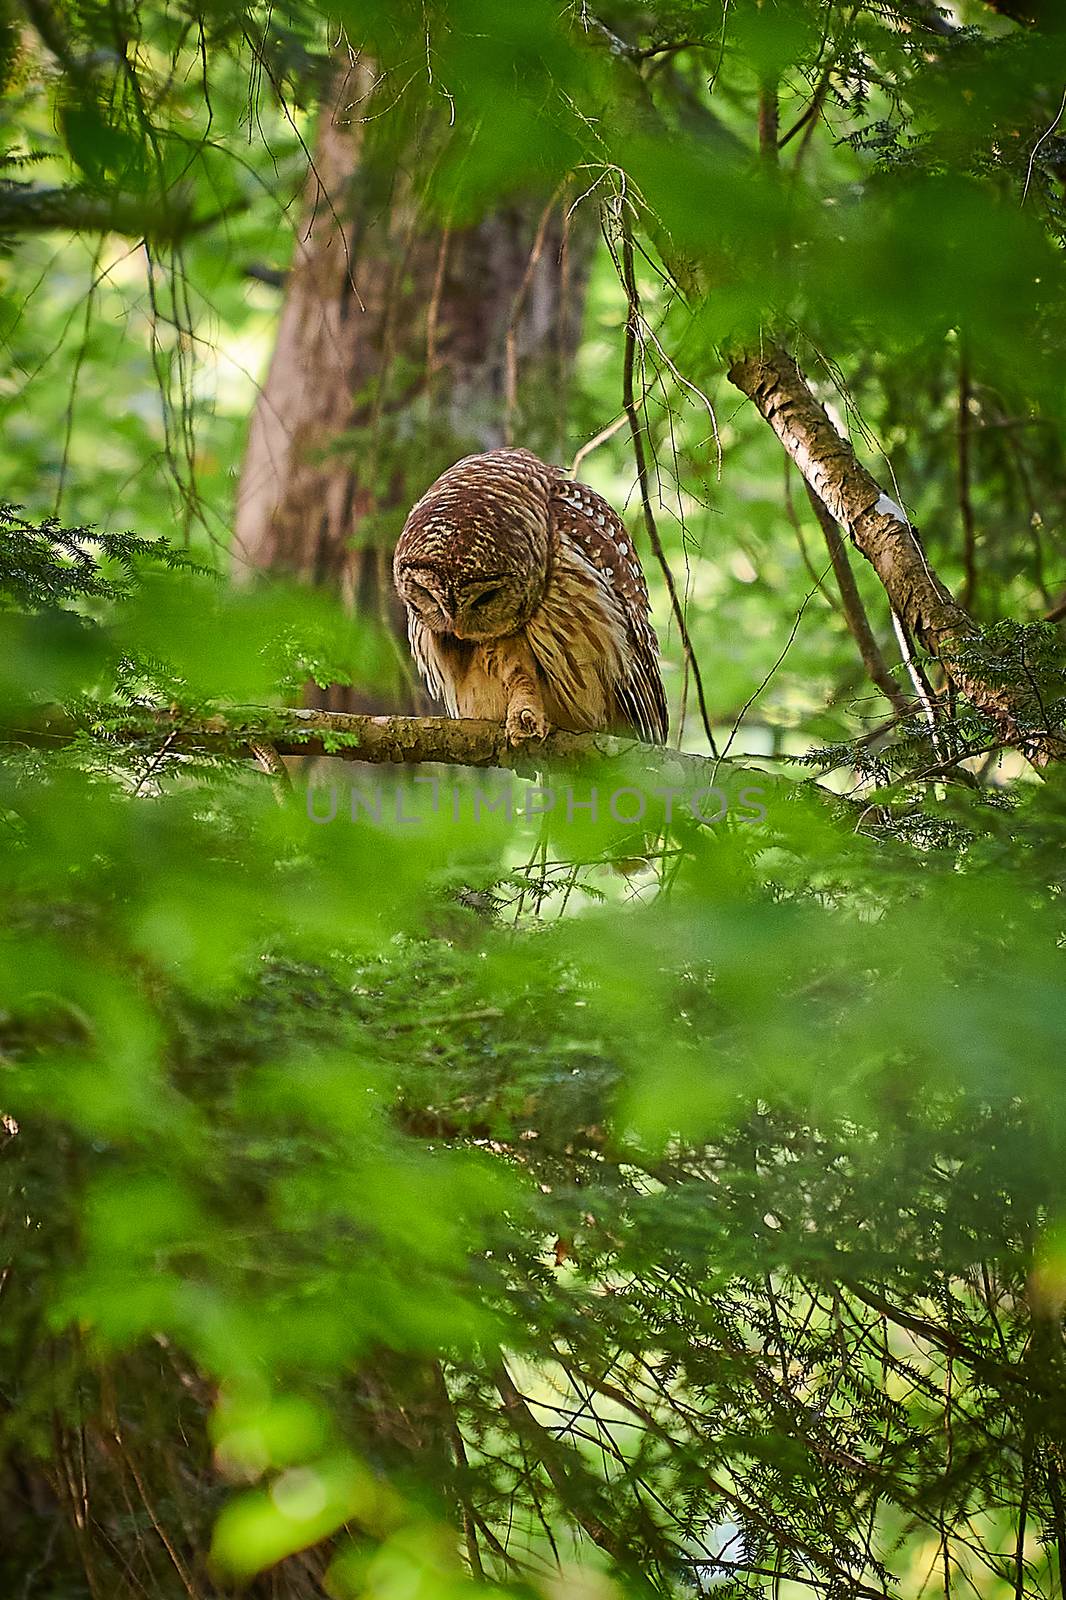 Adult Barred Owl sitting in a tree looking a potential pray.